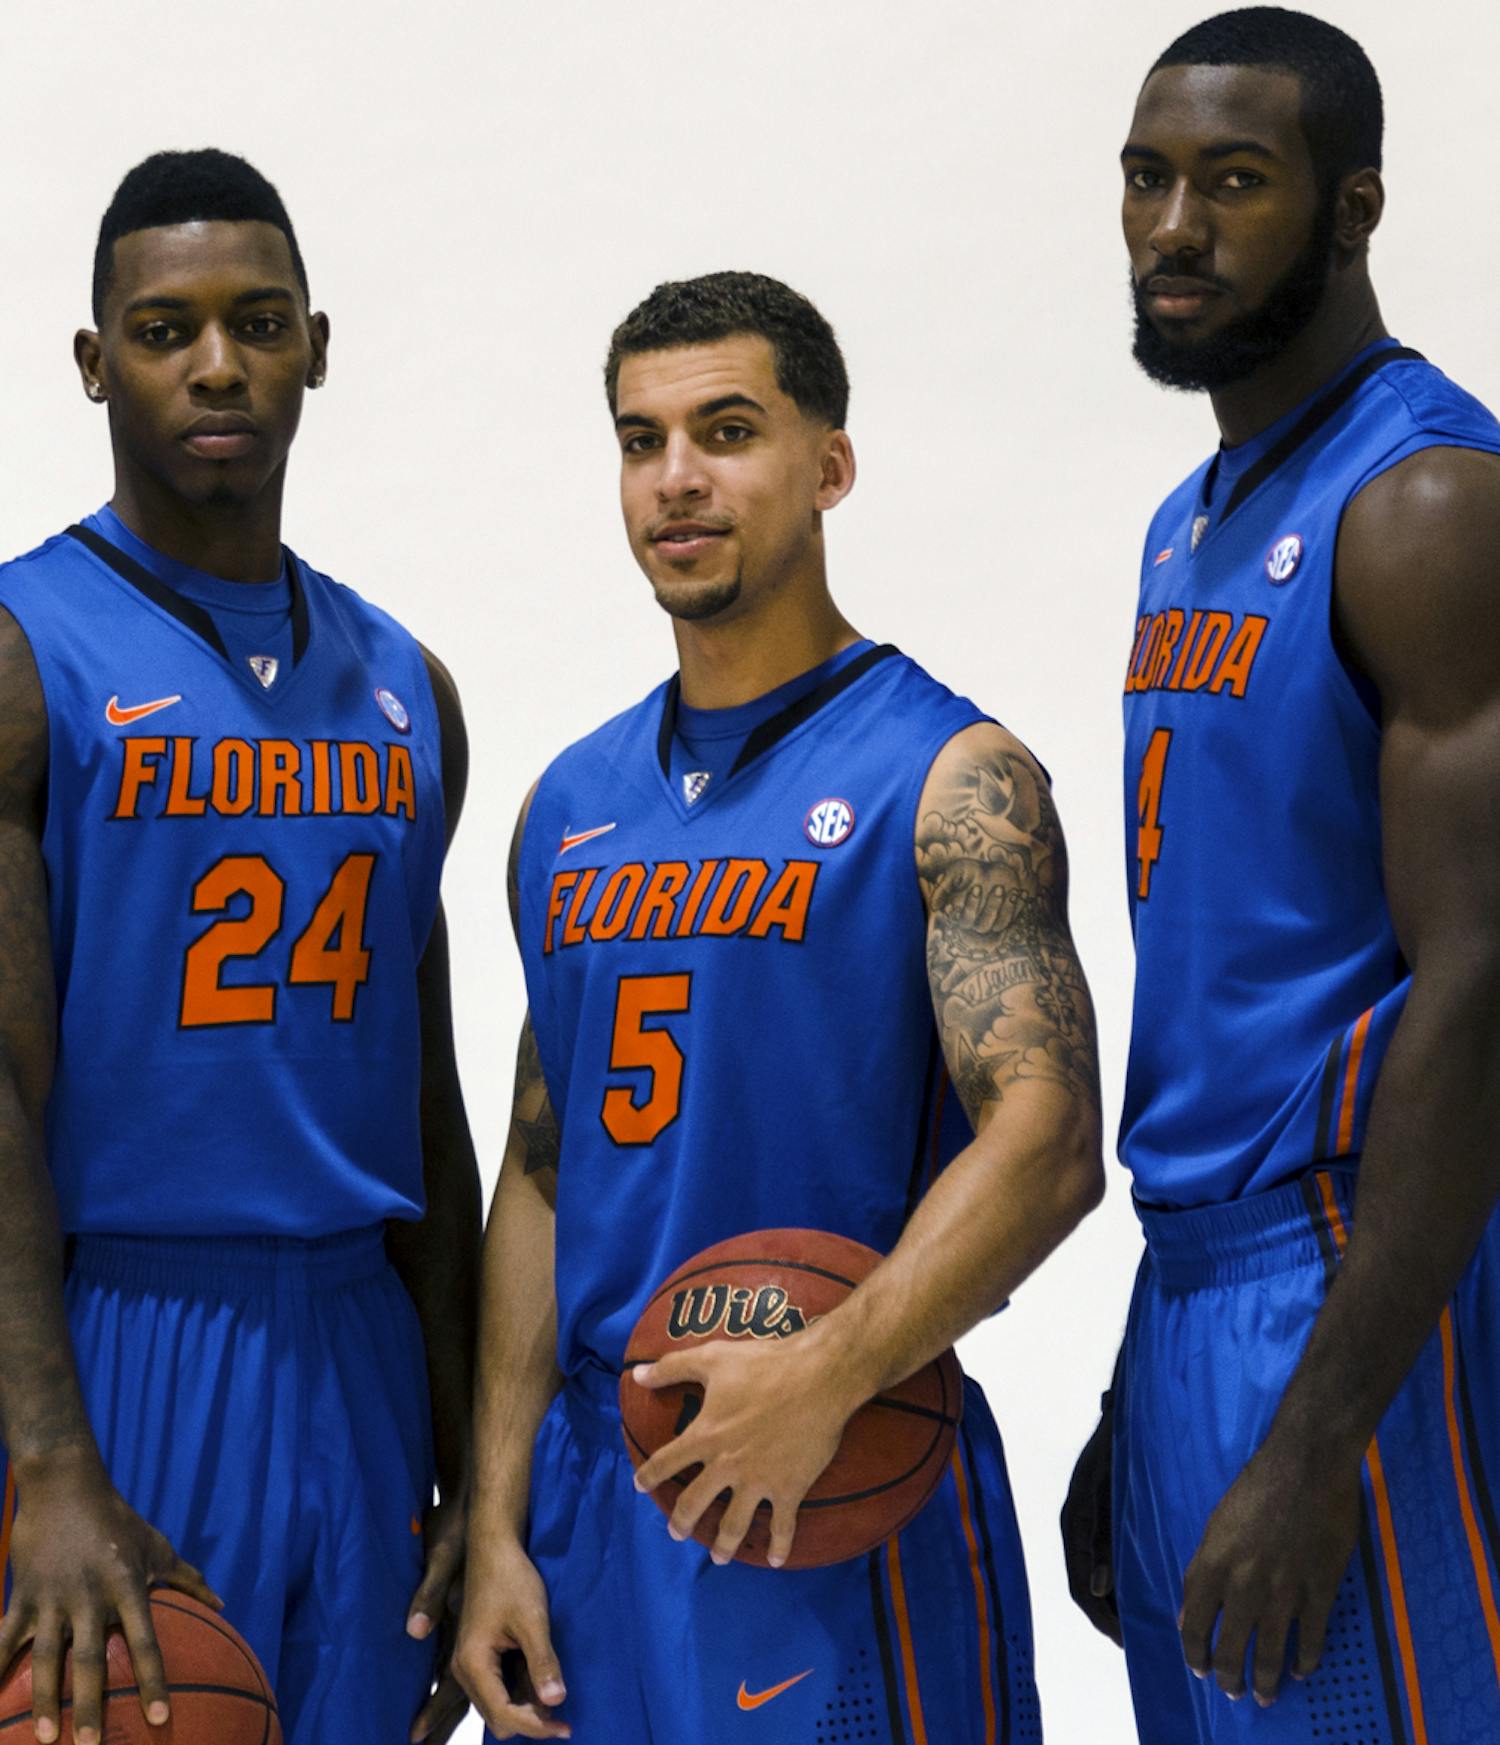 Scottie Wilbekin (center) poses for a photo with Casey Prather (left) and Patric Young (right) during Florida’s basketball media day on Oct. 9. Prather will miss Saturday's game, Wilbekin is questionable and Young will see limited minutes.